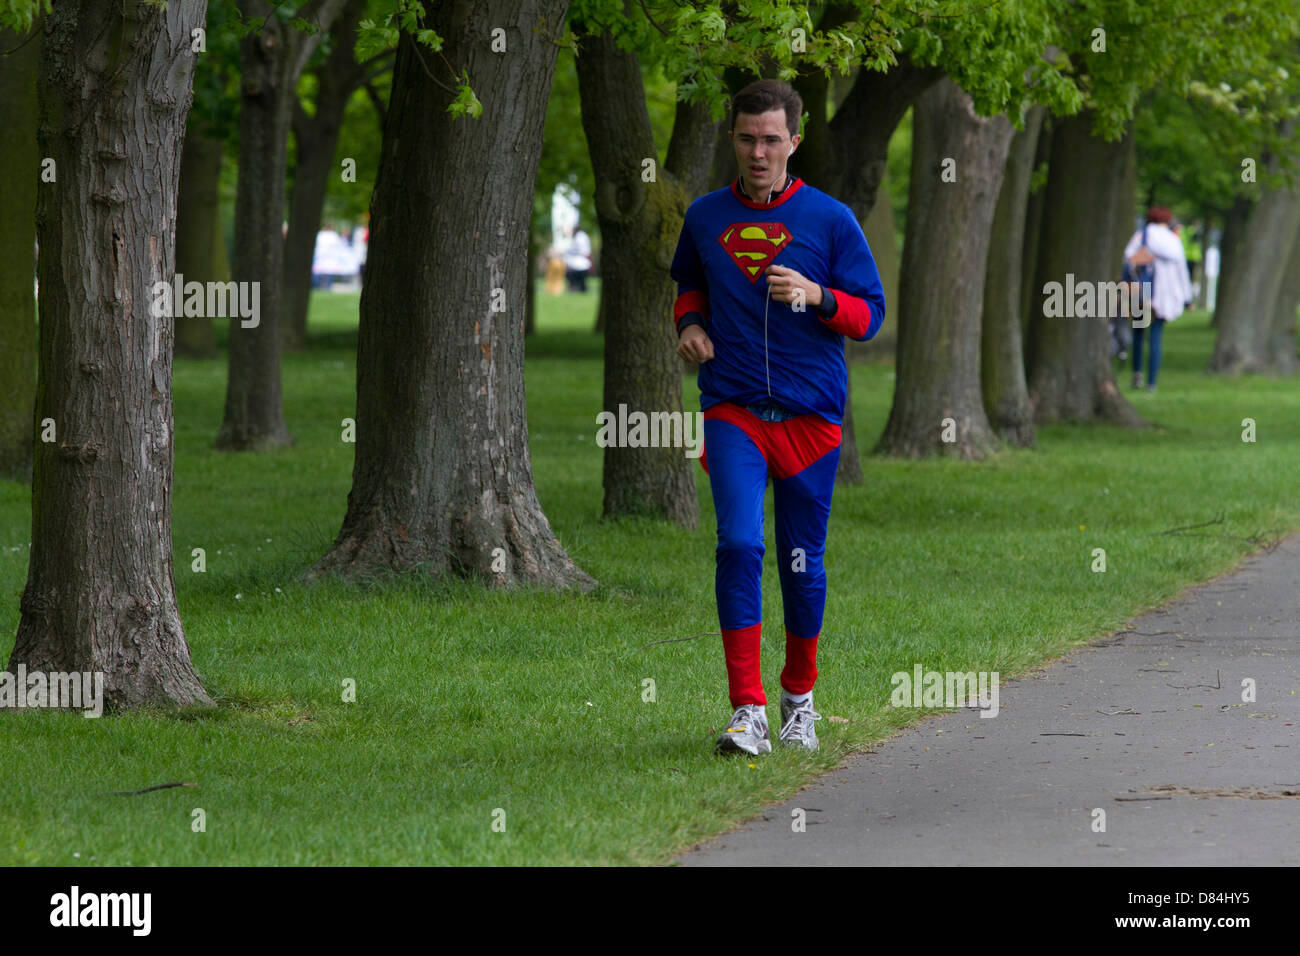 19th May 2013. London UK. Hundreds of people dressed as comic heroes take part in the Super hero fun running event in Regents's Park over 5K and 10K to raise money for different charities. Stock Photo